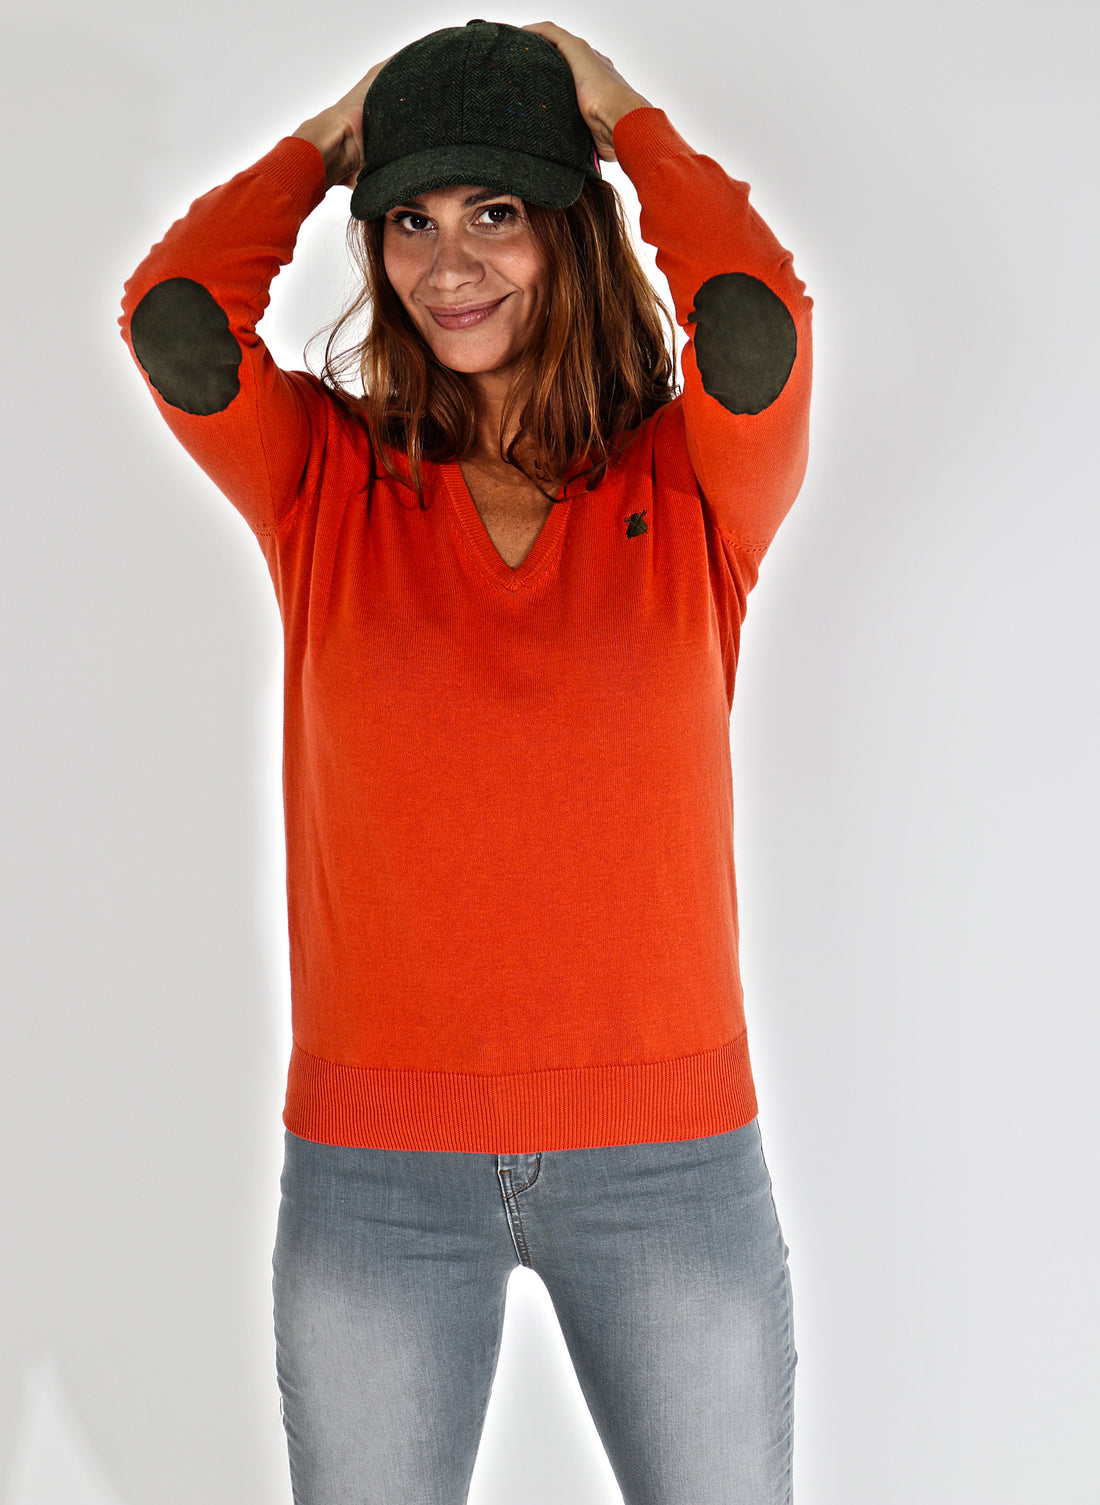 Women's Knitted Knitted Sweater with Elbow Pads